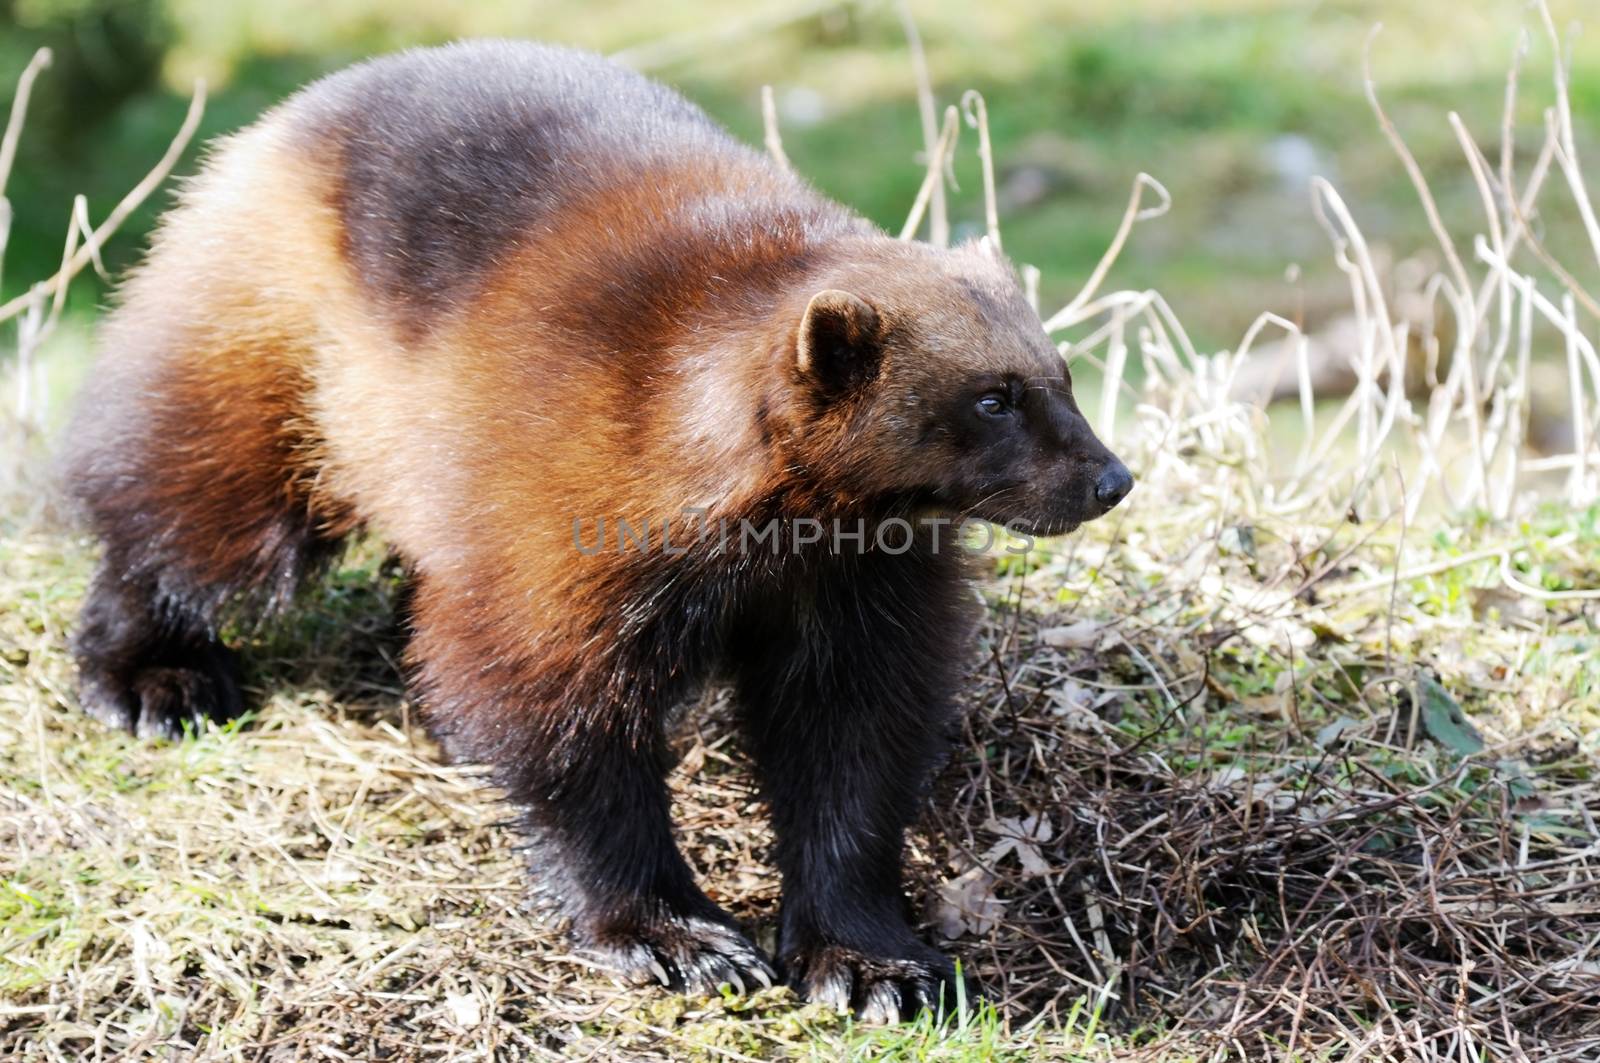 Wolverine in the wild and bright sunshine